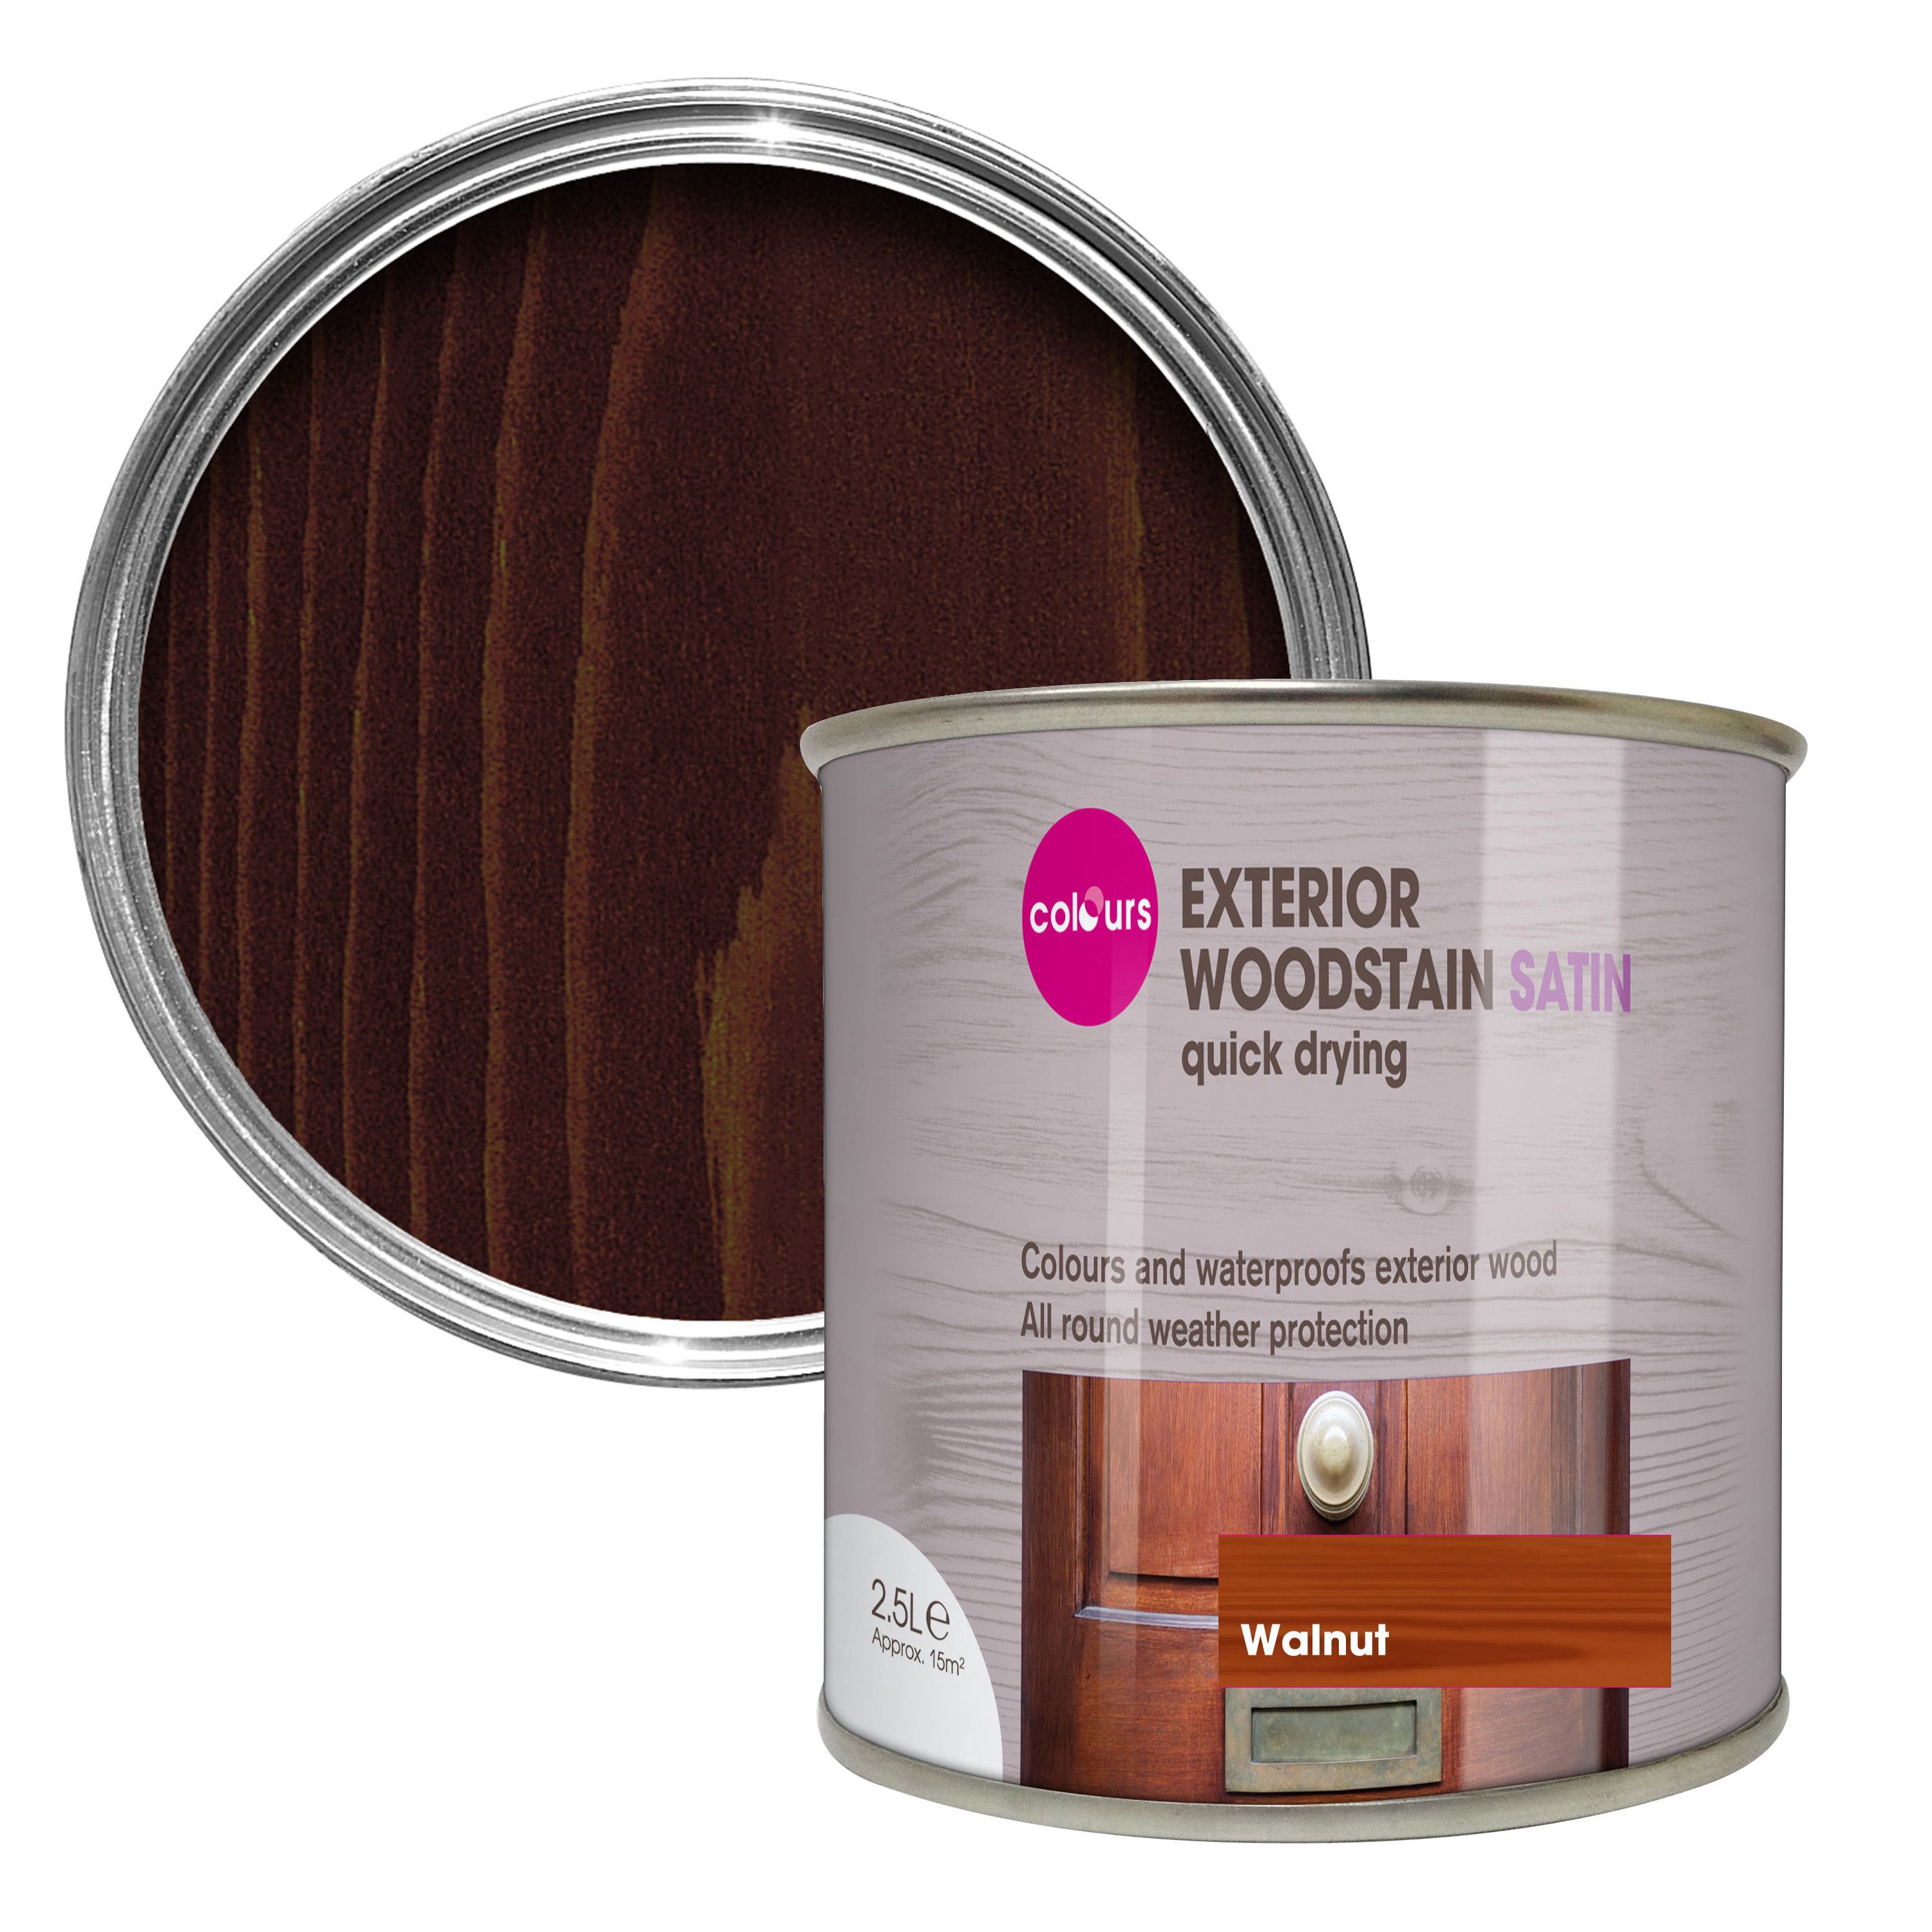 87 New Wood floor stain colors bq for 